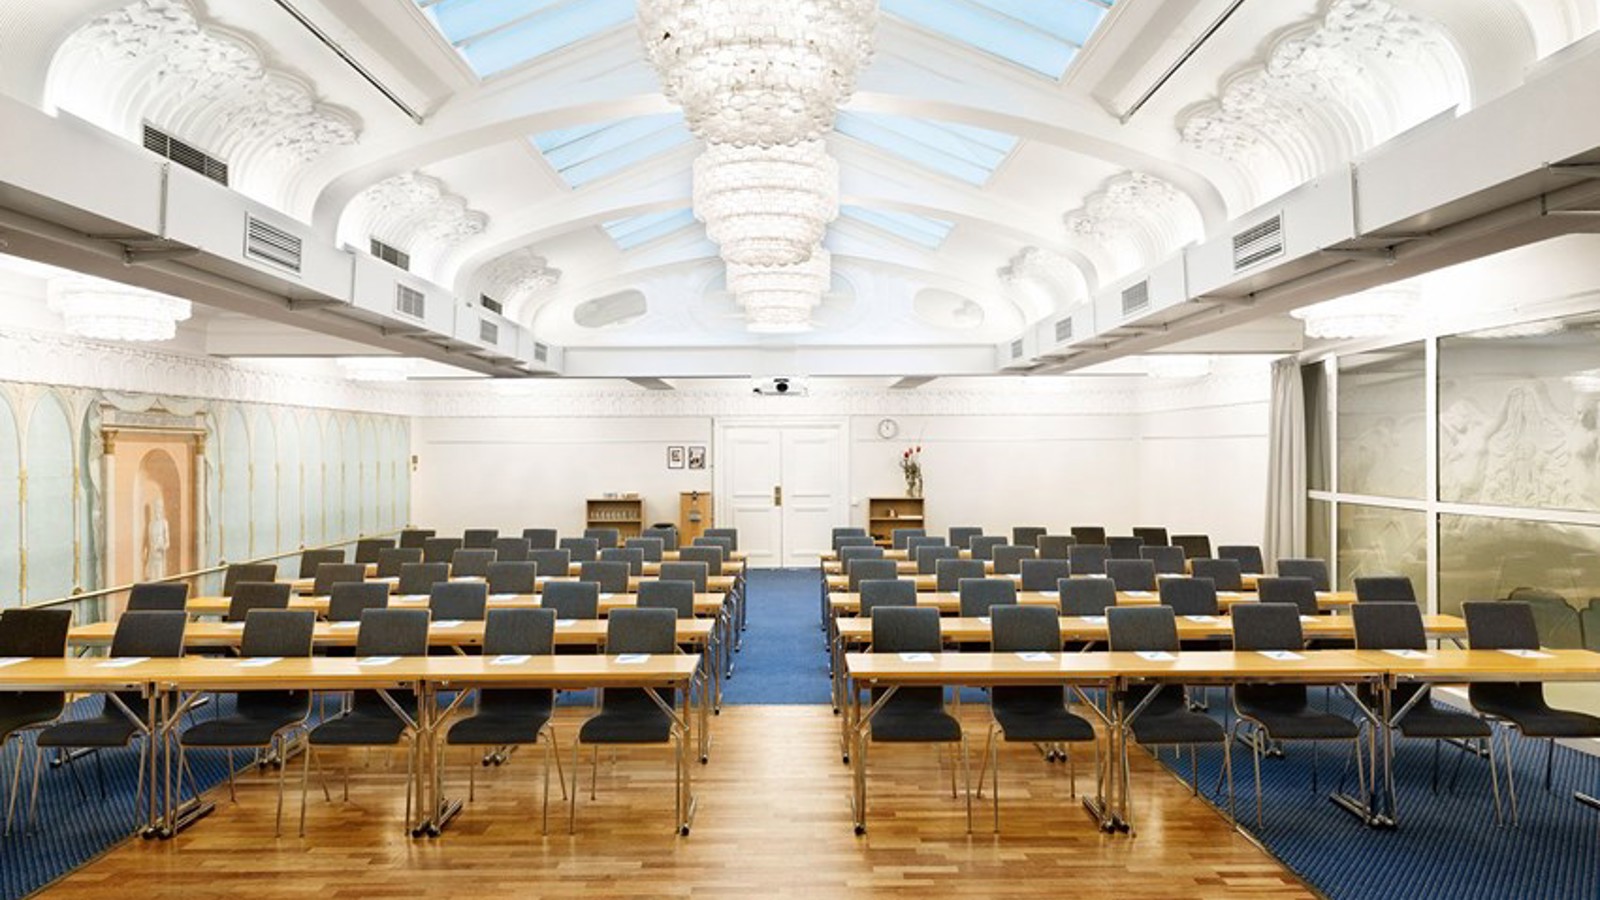 Large and bright conference room with lined up chairs, skylights and wooden floors